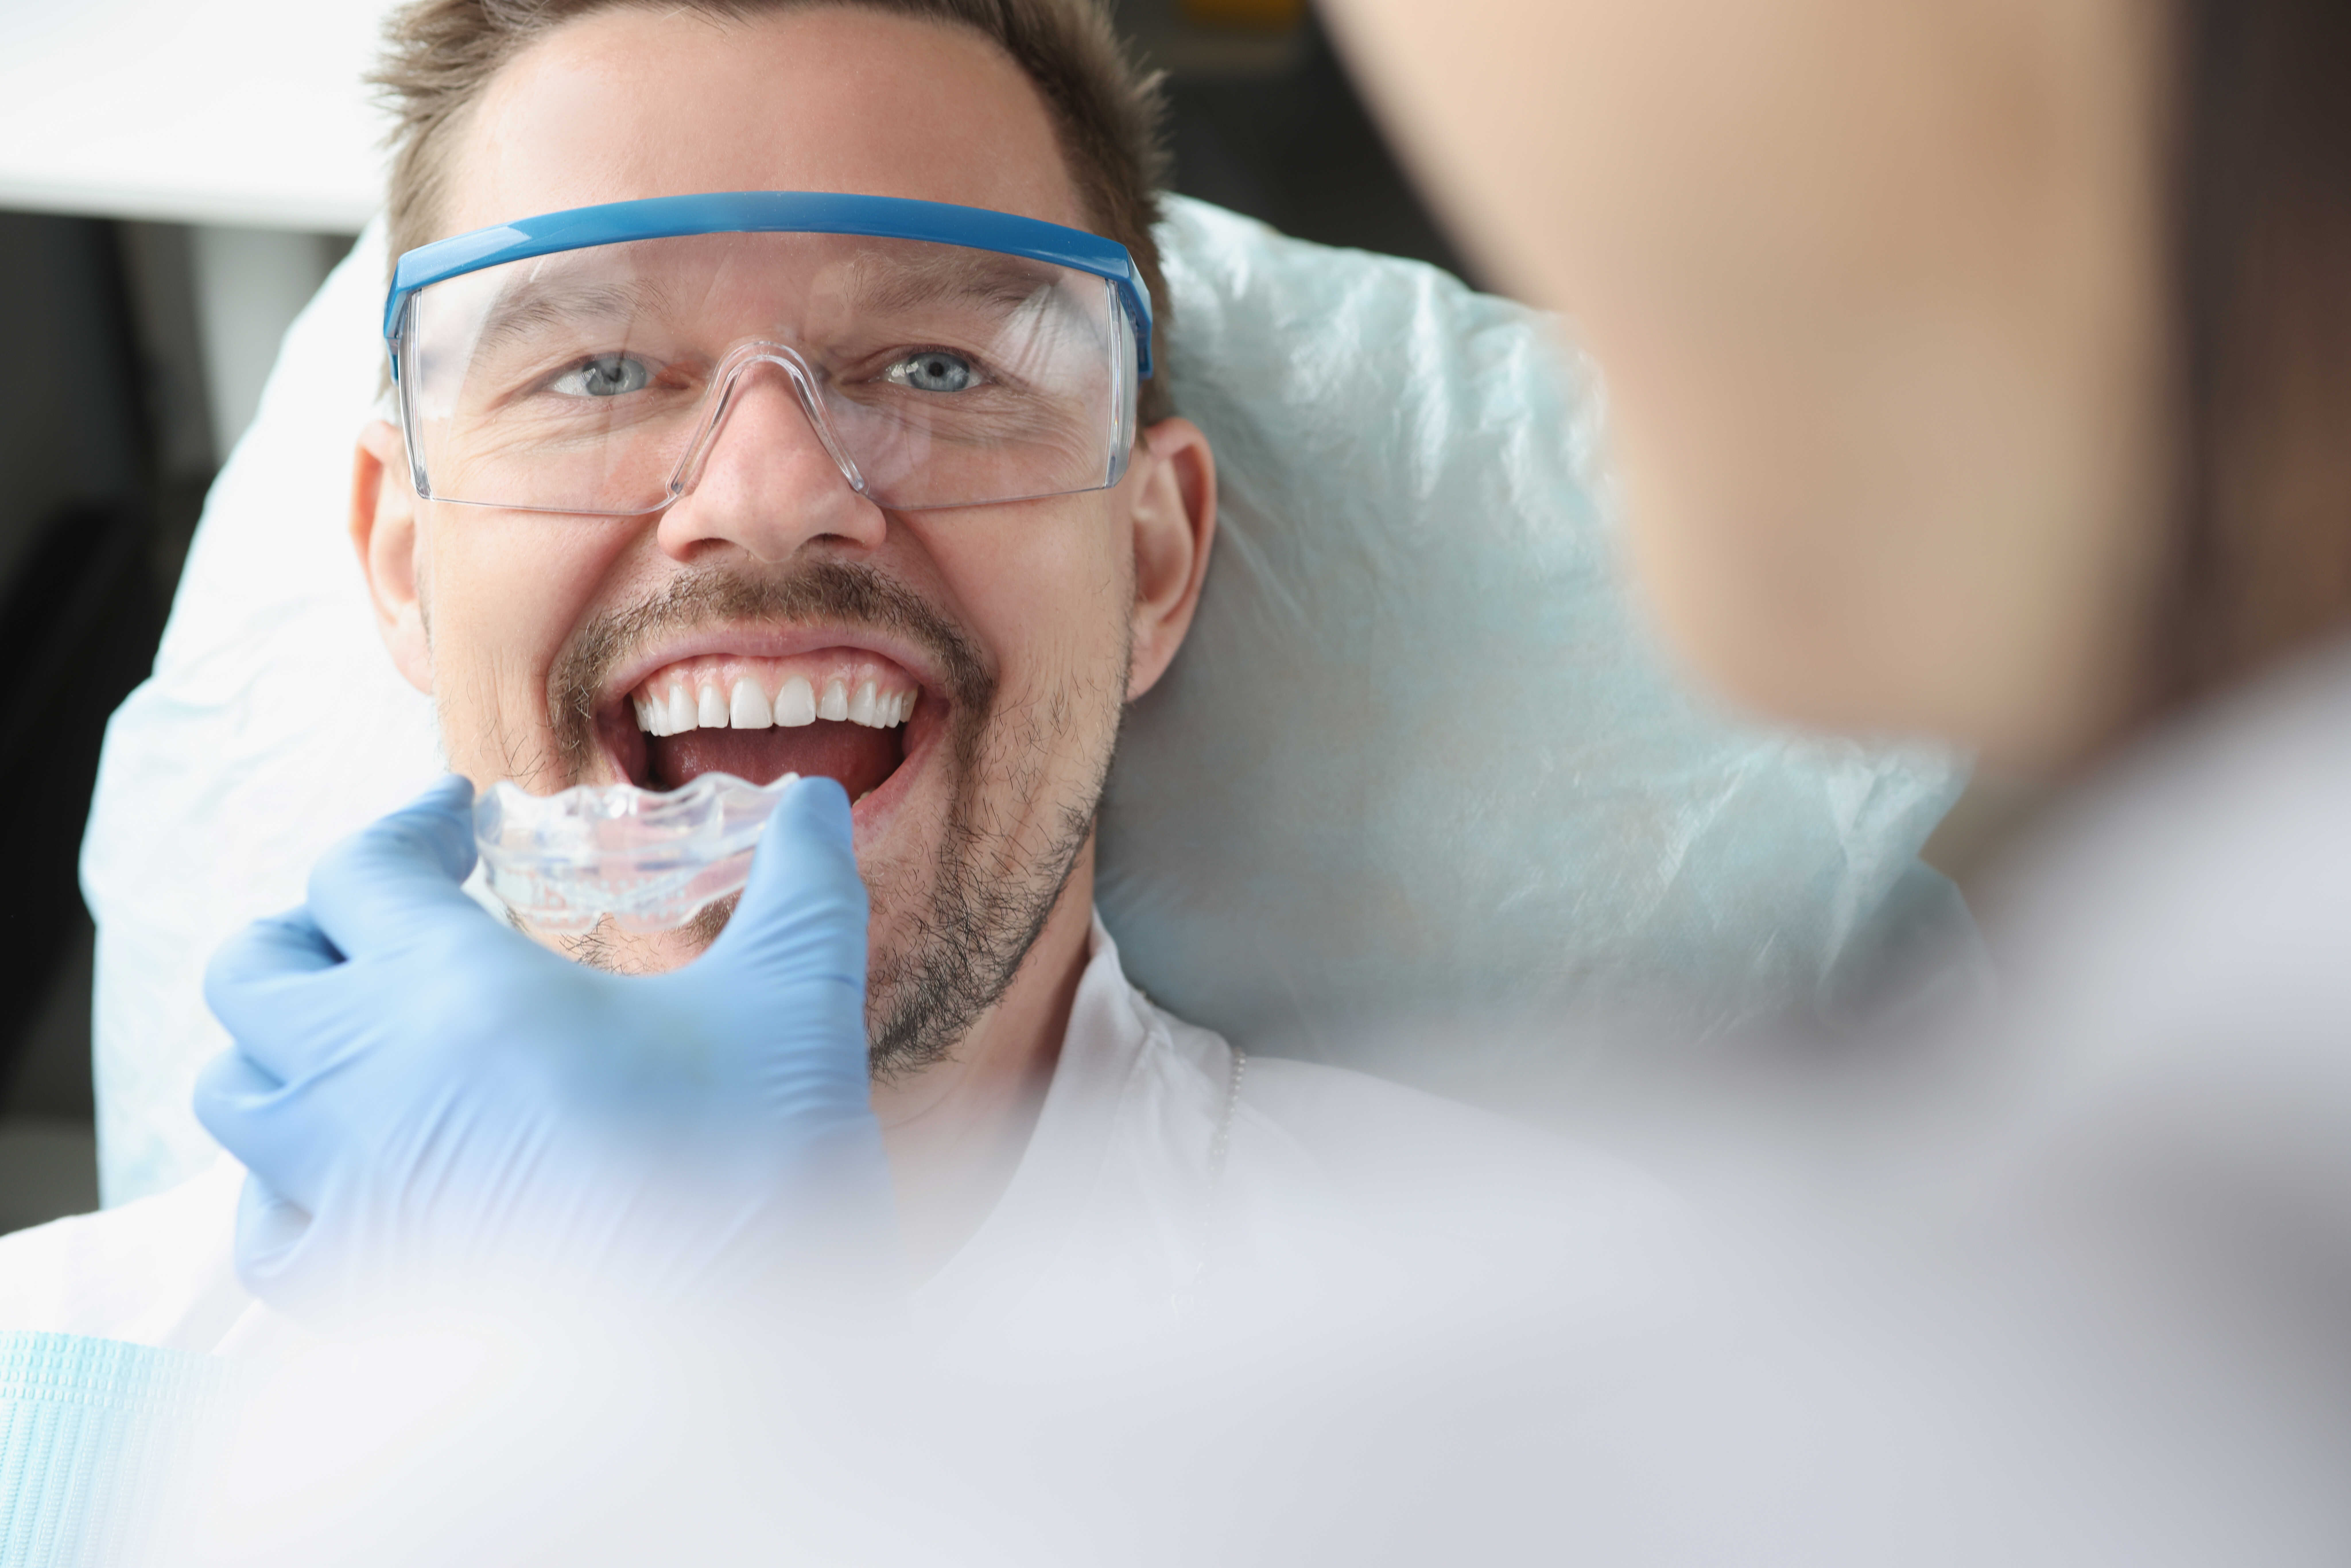 doctor-tries-on-plastic-mouthguard-for-young-smiling-man-to-correct-bite